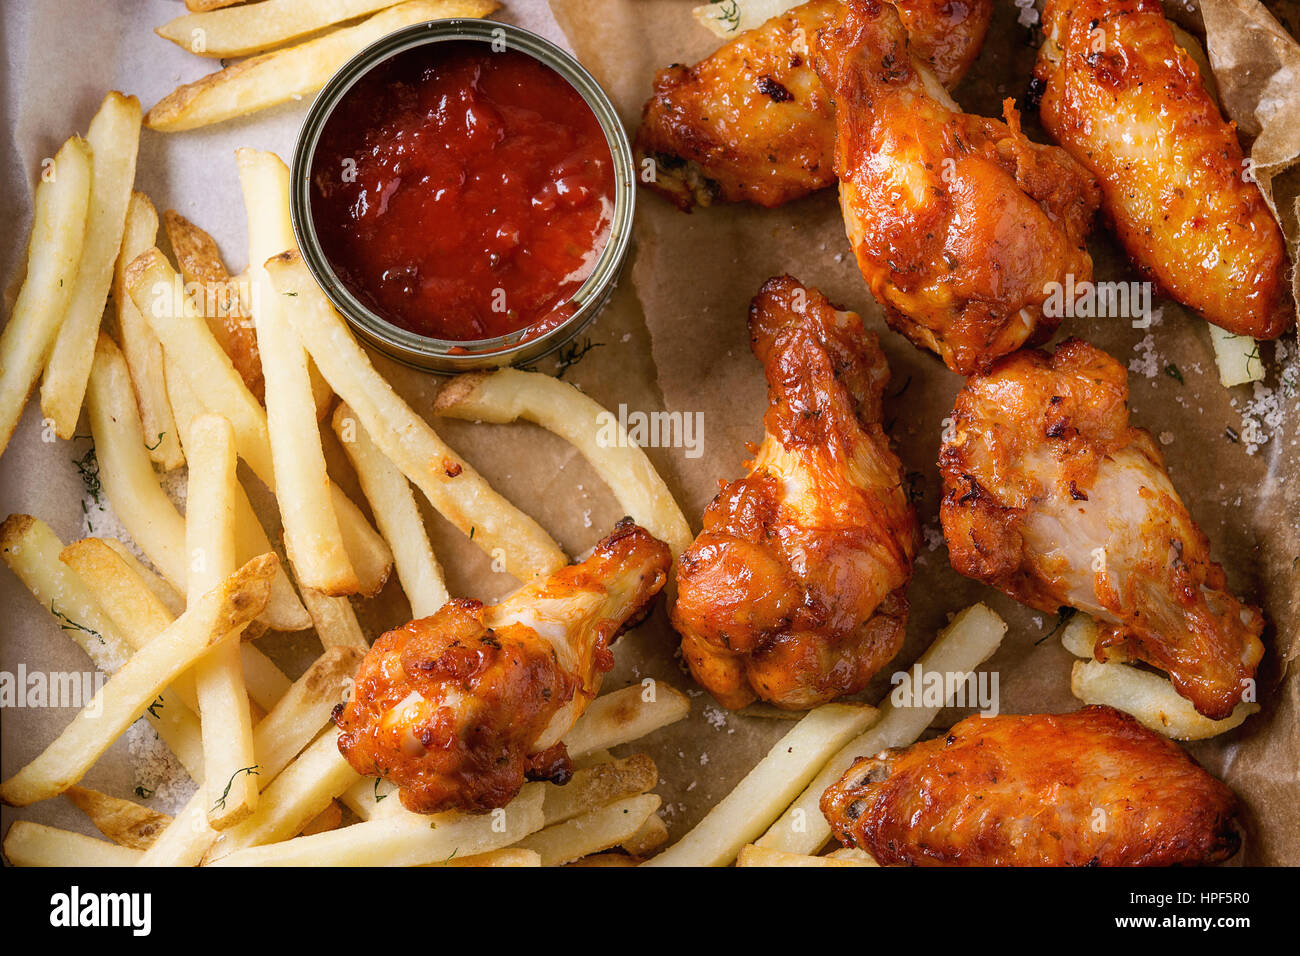 Fast food fried spicy chicken legs, wings and french fries potatoes with salt and ketchup sauce served on baking paper. Top view, close up Stock Photo